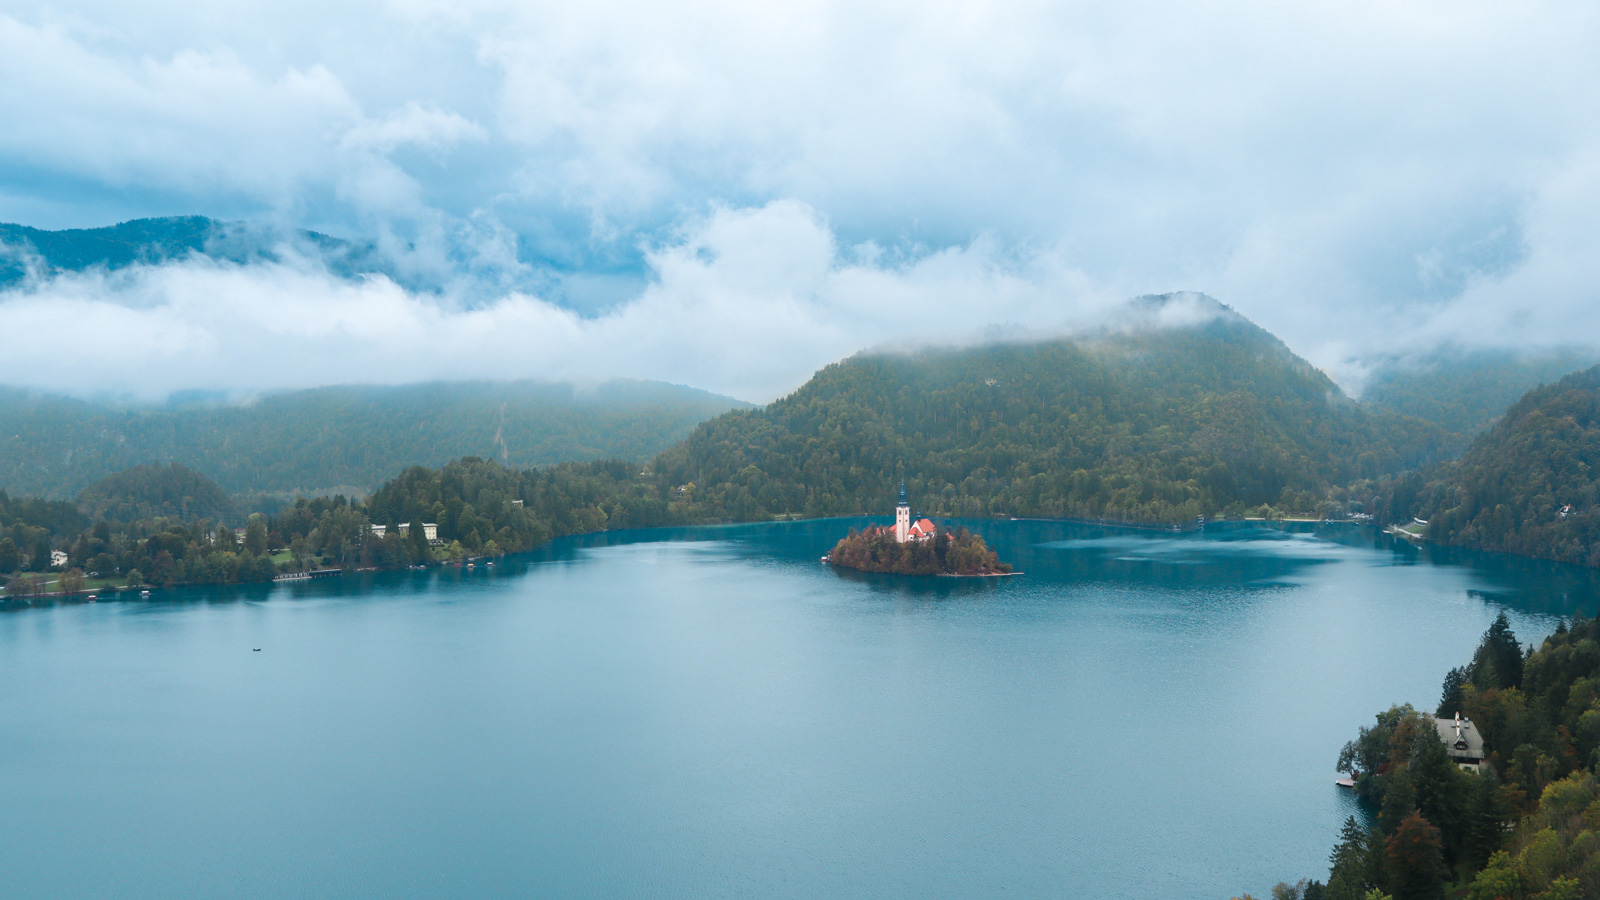 View of Lake Bled from Bled Castle, Slovenia